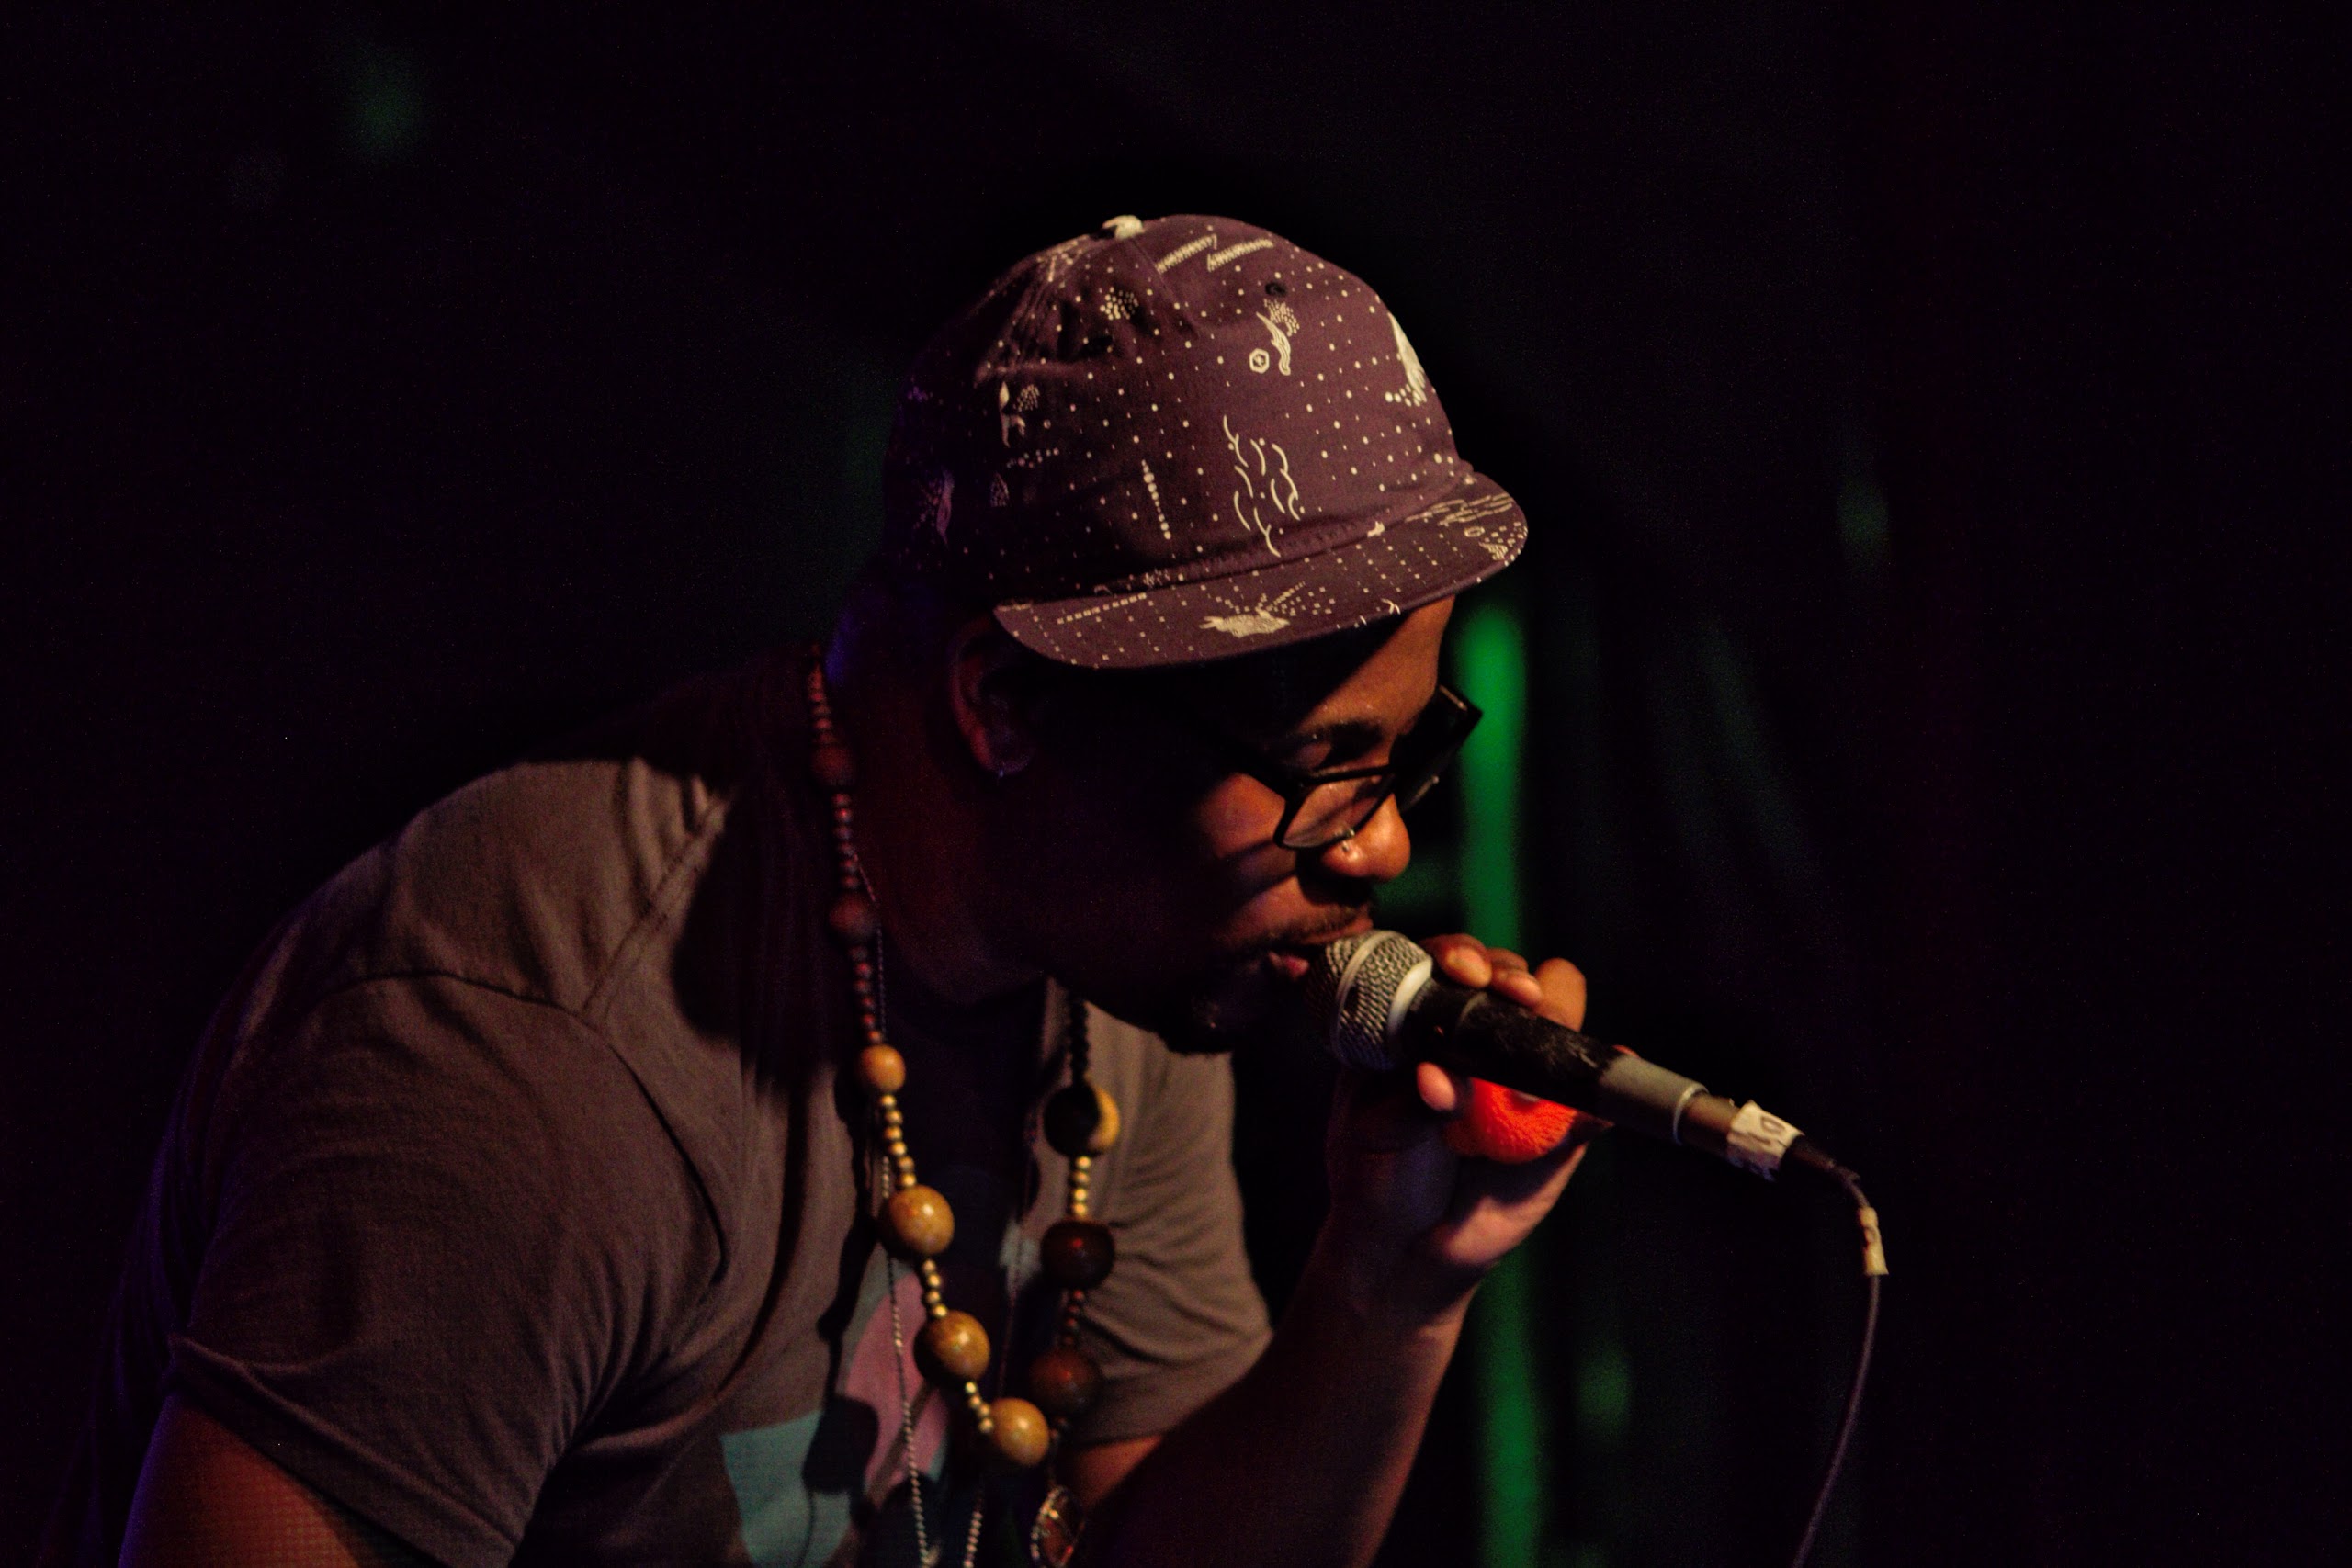 Open Mike Eagle + Milo (Hellfyre Club) Live Photo Gallery